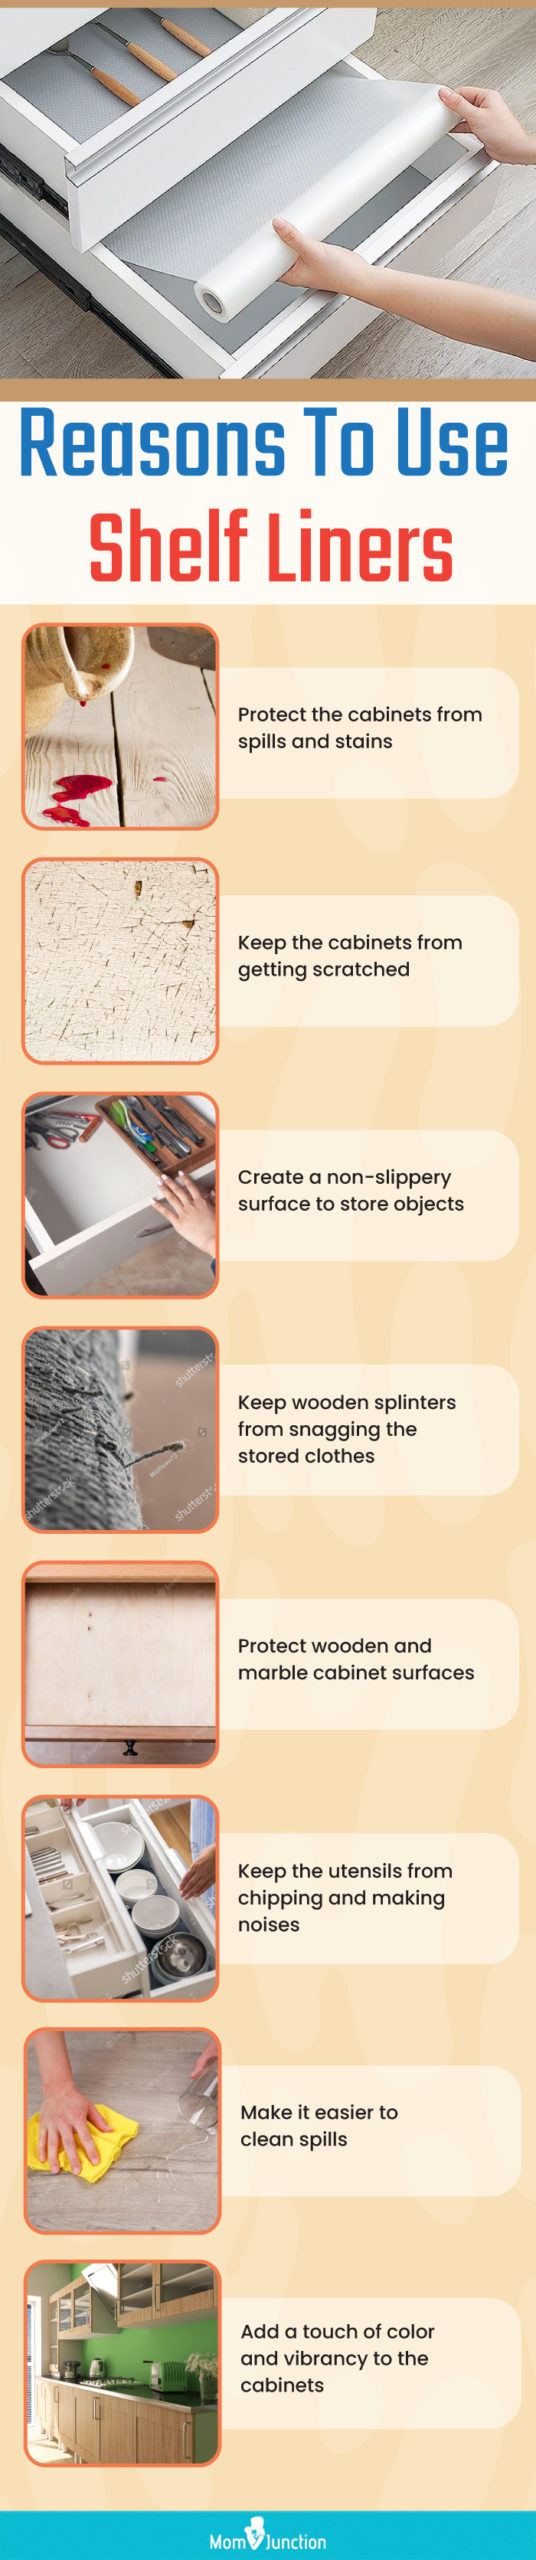 Reasons To Use Shelf Liners (infographic)